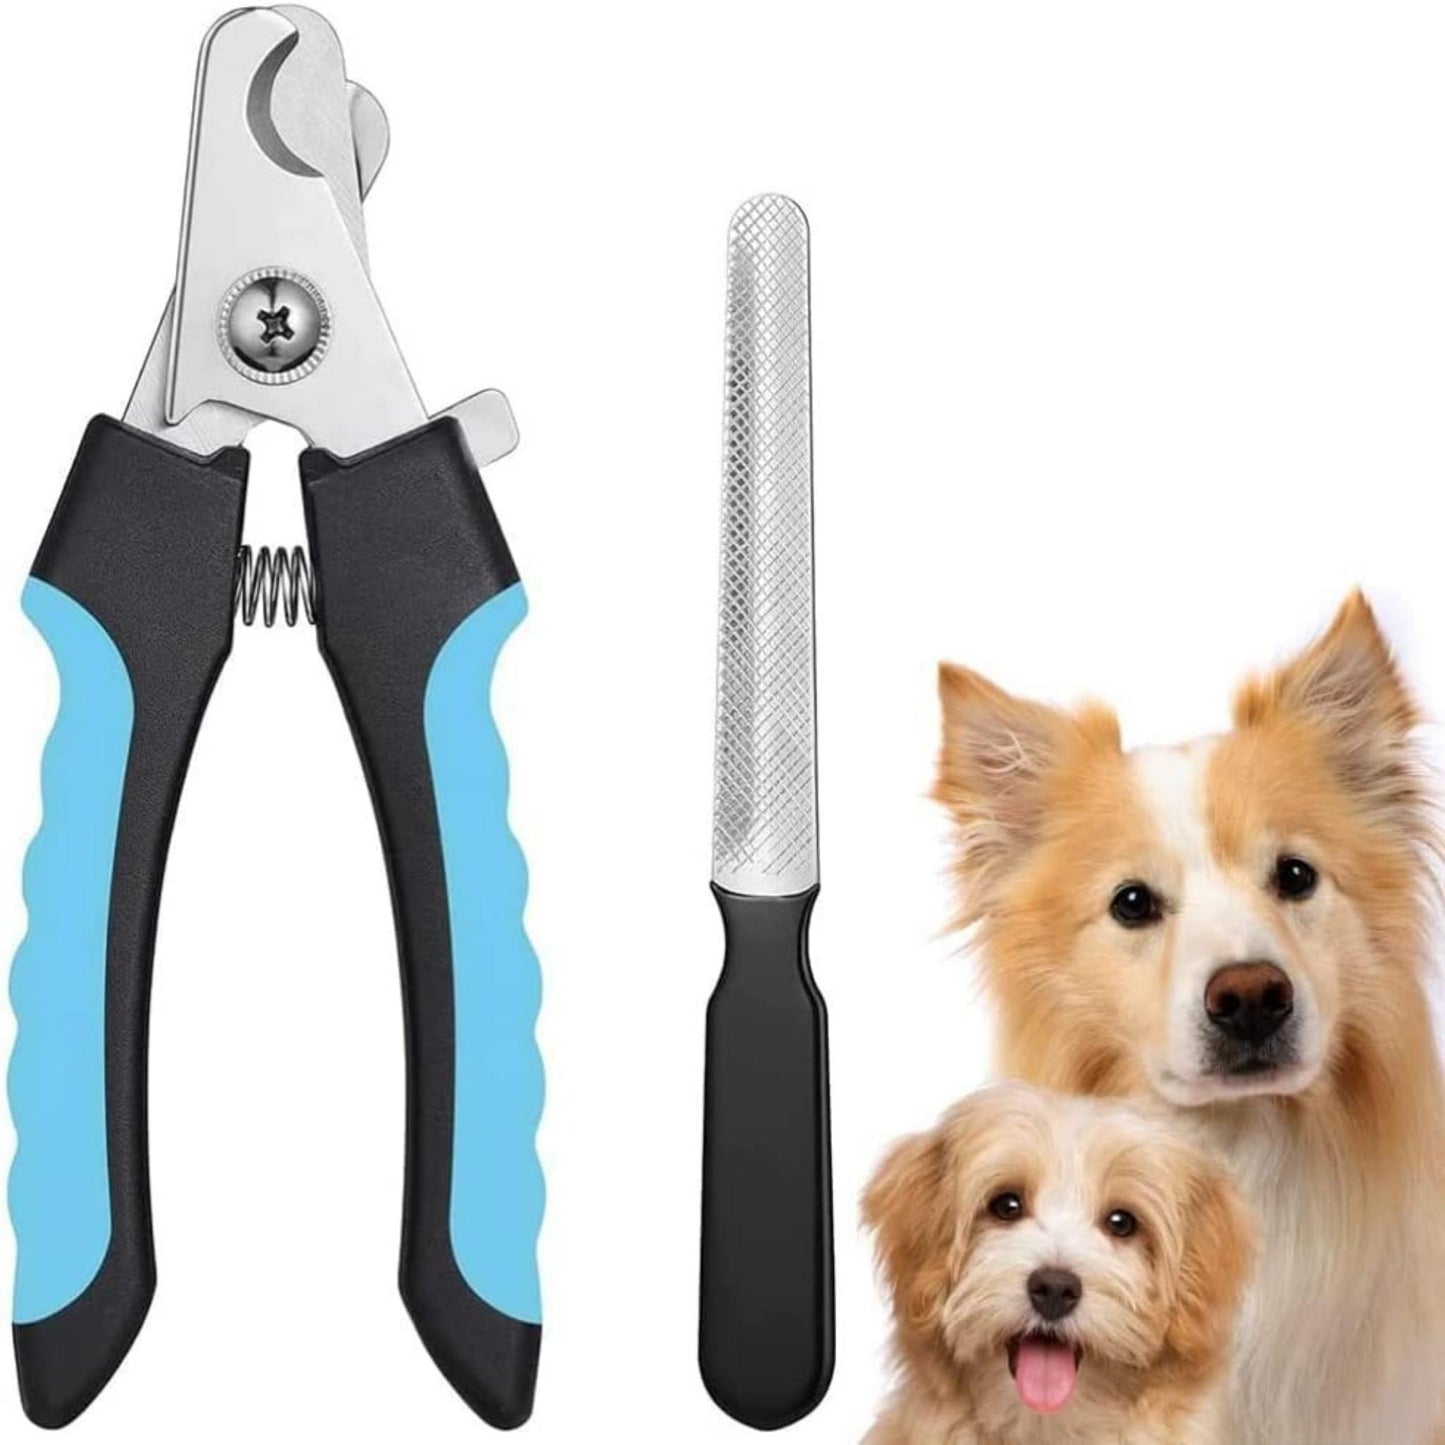 Foodie Puppies Nail Clipper with Filer for Small Dogs, Cats & Puppies